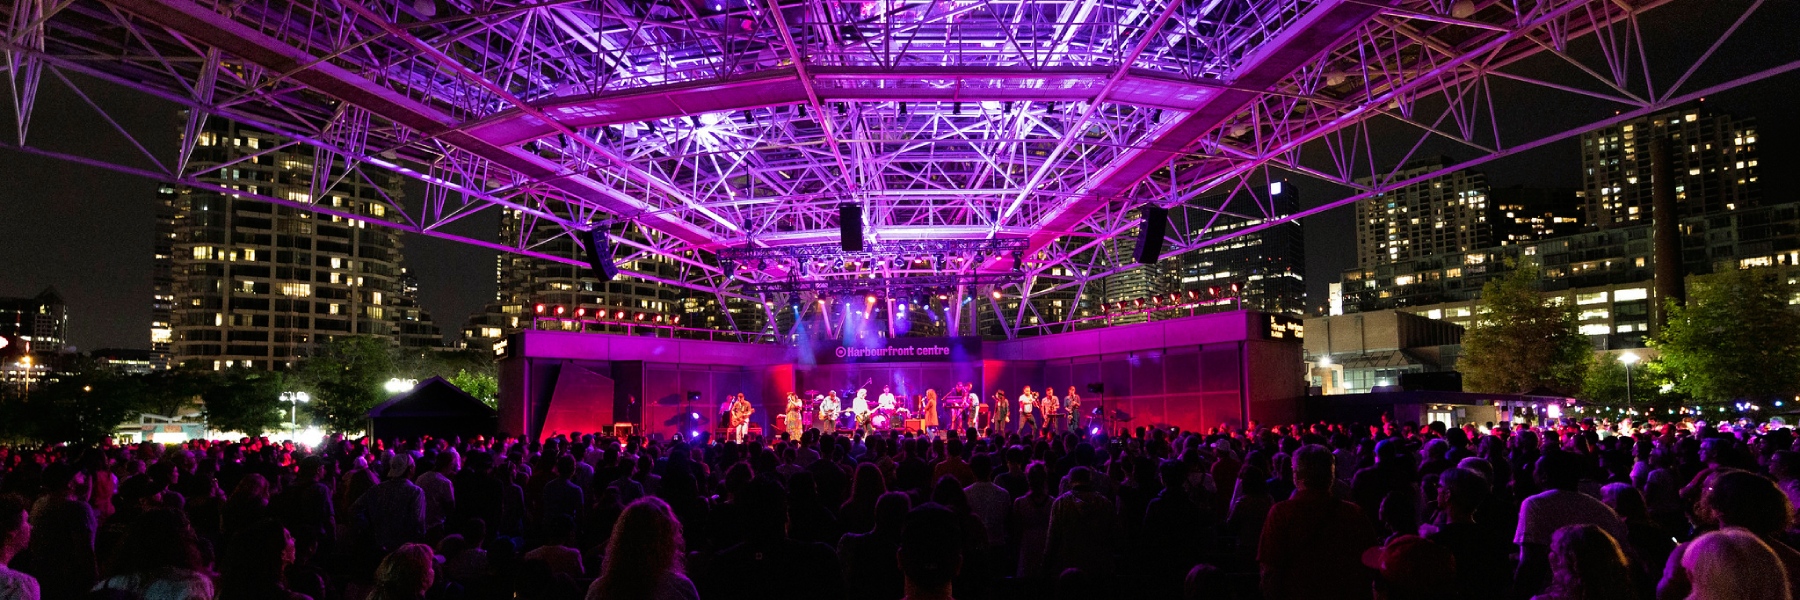 Summer Music Concerts - Harbourfront Centre